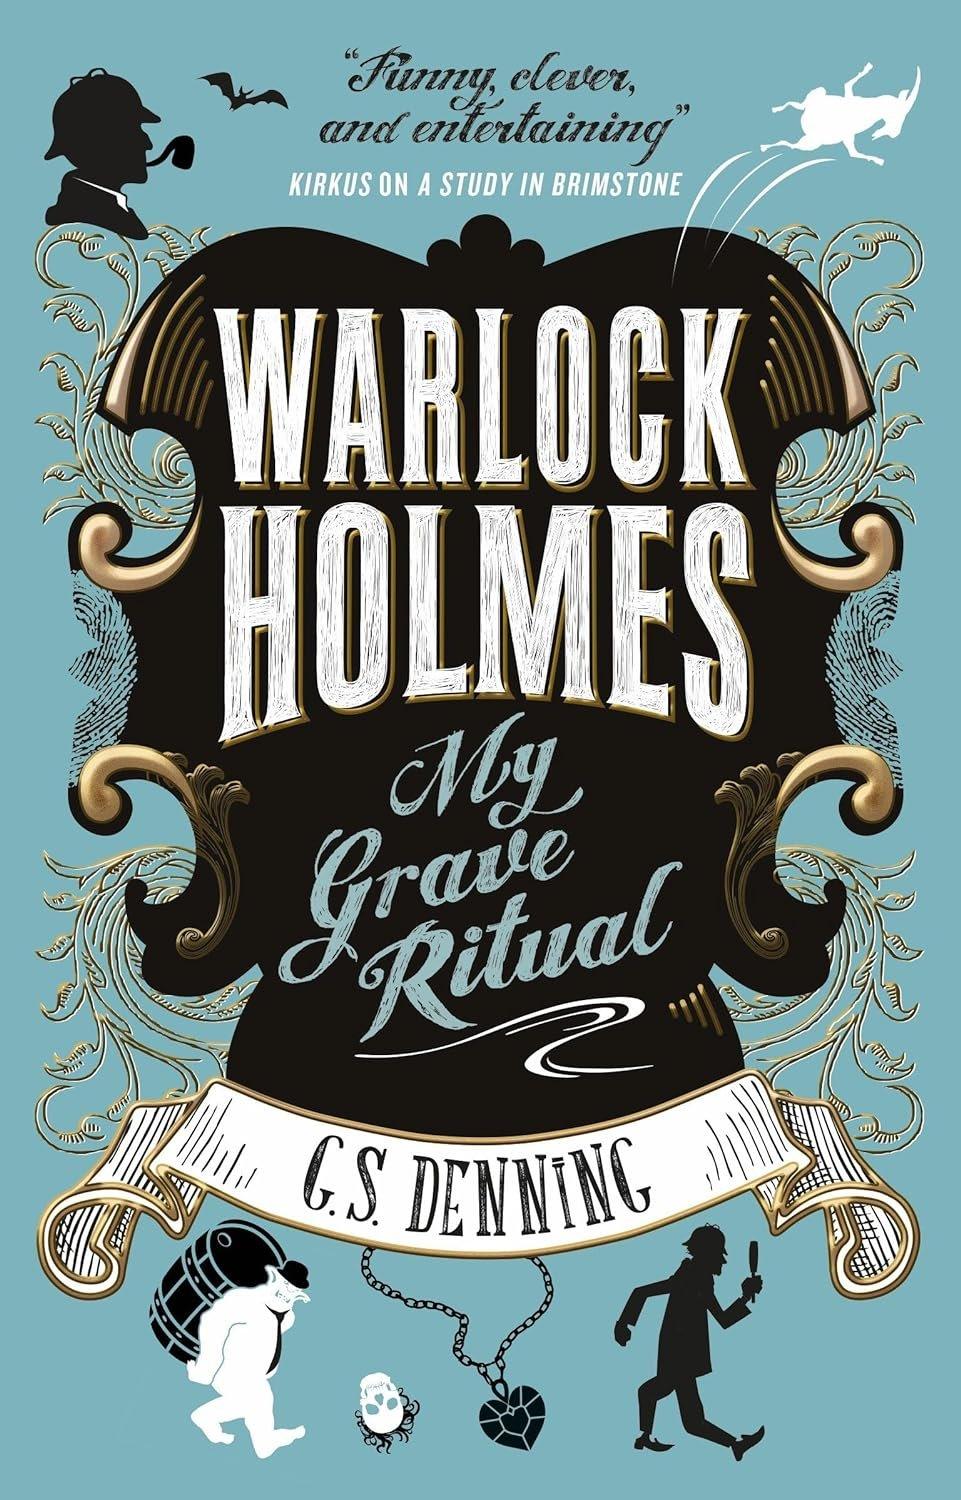 Cover of the book "Warlock Holmes: My Grave Ritual" by G.S. Denning, featuring ornate, Victorian-style illustrations with silhouettes of detective characters and supernatural elements on a teal background.